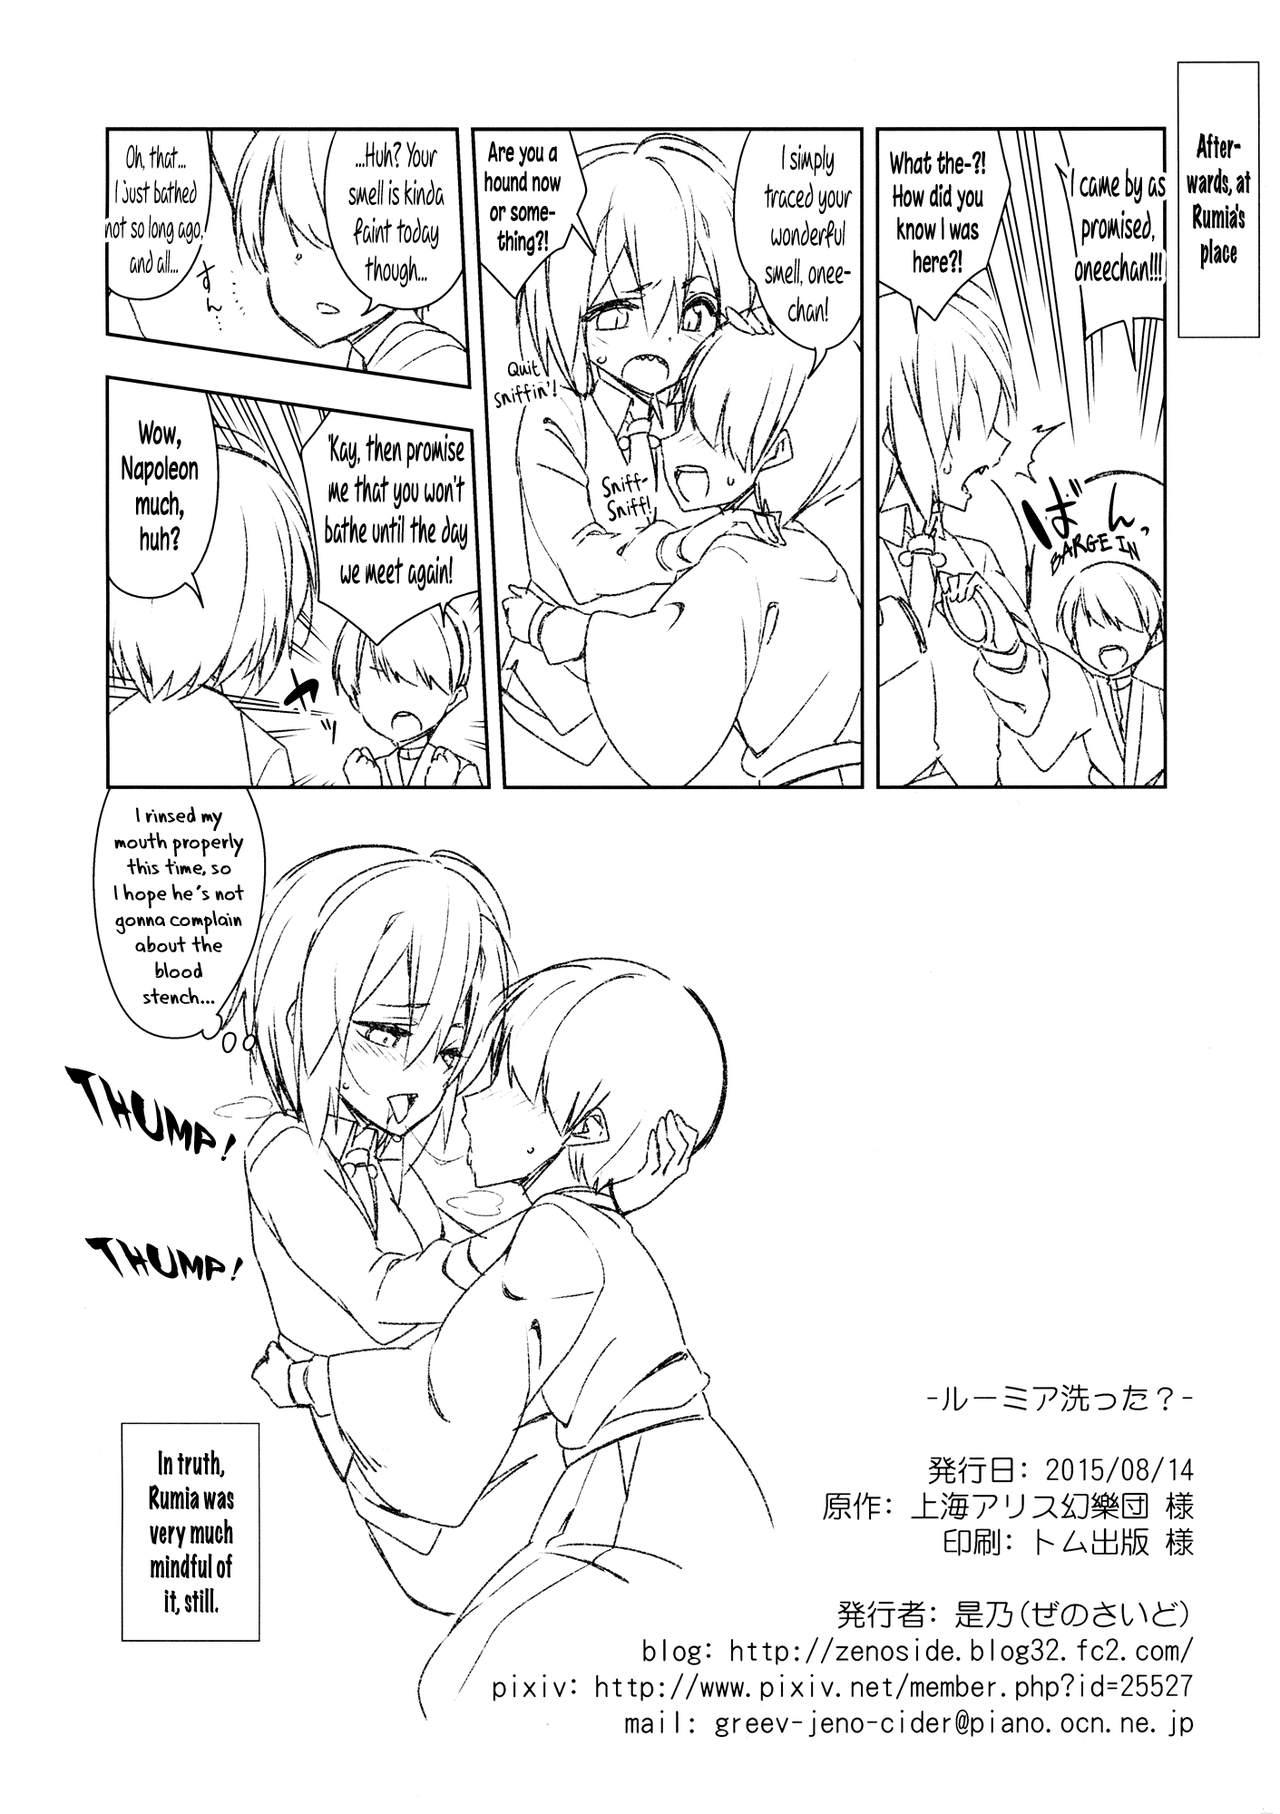 Realitykings Rumia Aratta？| Have you washed, Rumia? - Touhou project Bigbooty - Page 25